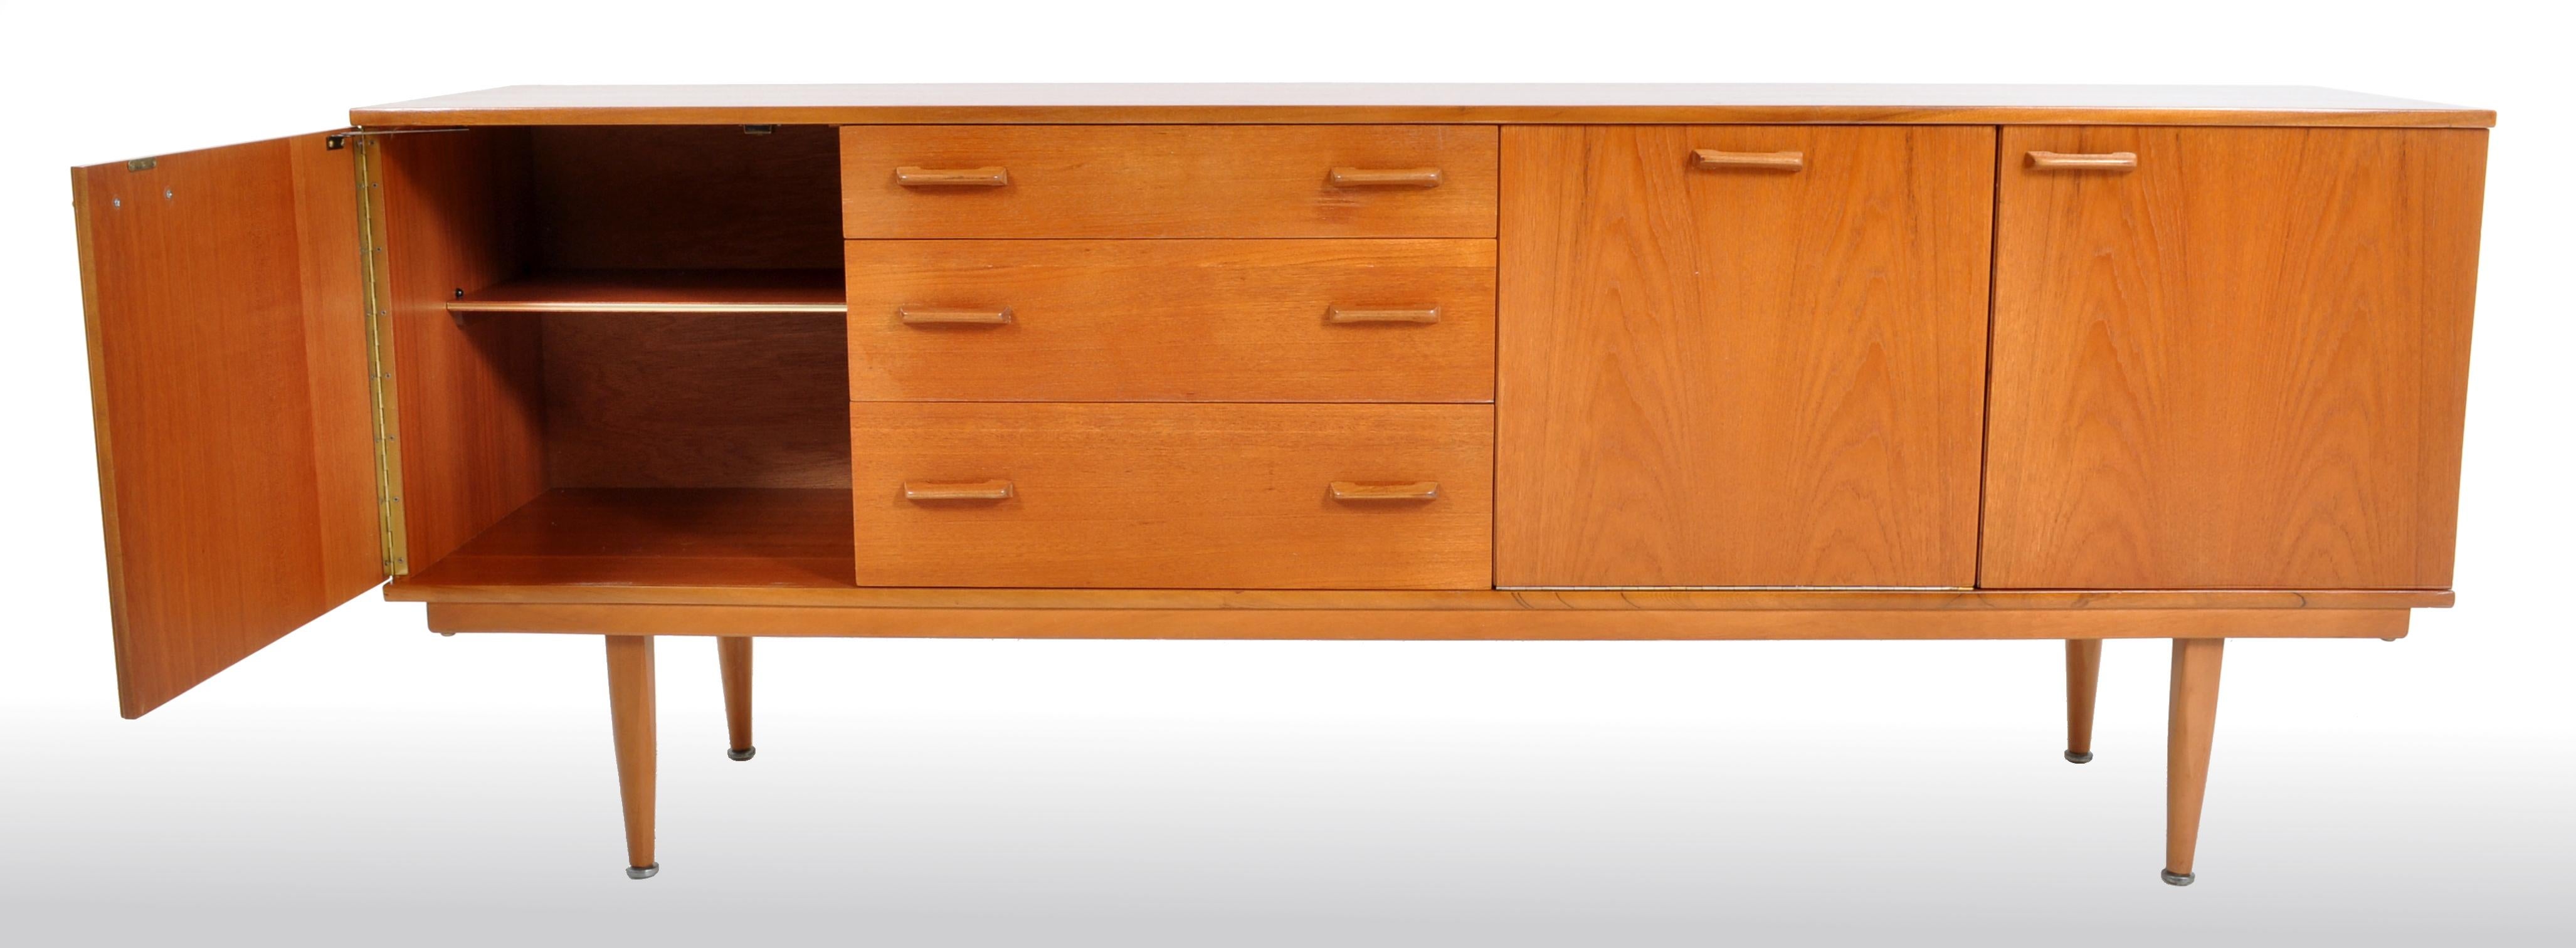 Mid-Century Modern Danish credenza in teak, 1960s. The credenza having a single cupboard door to either end enclosing single shelves. To the center a bank of three graduated drawers next to a fall-front cupboard enclosing a single shelf and mirrored